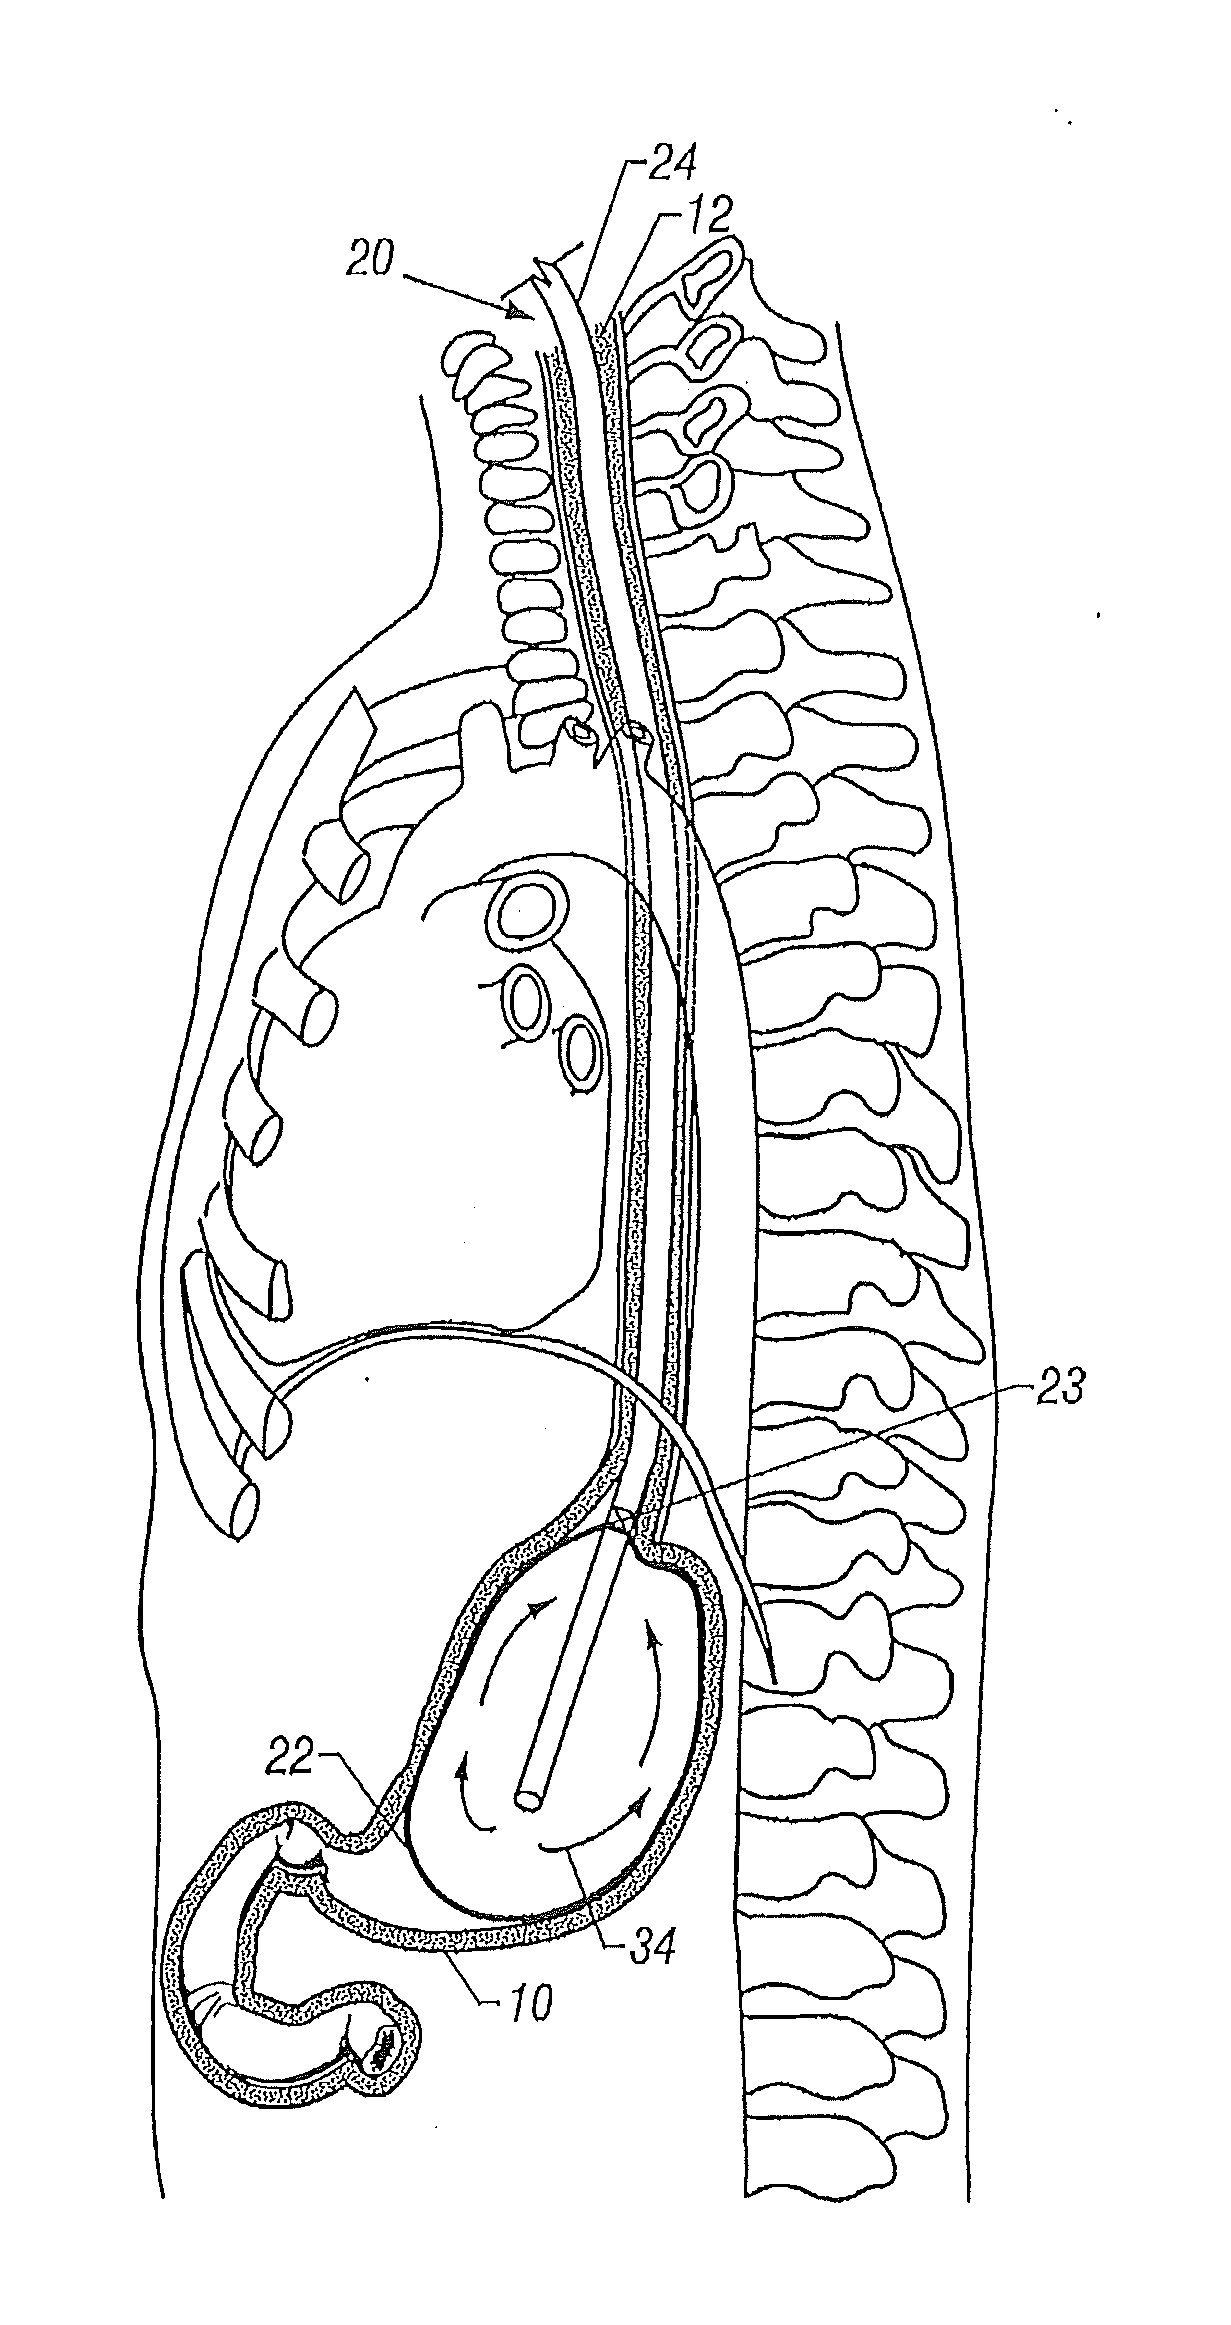 Apparatus and method for esophageal cooling